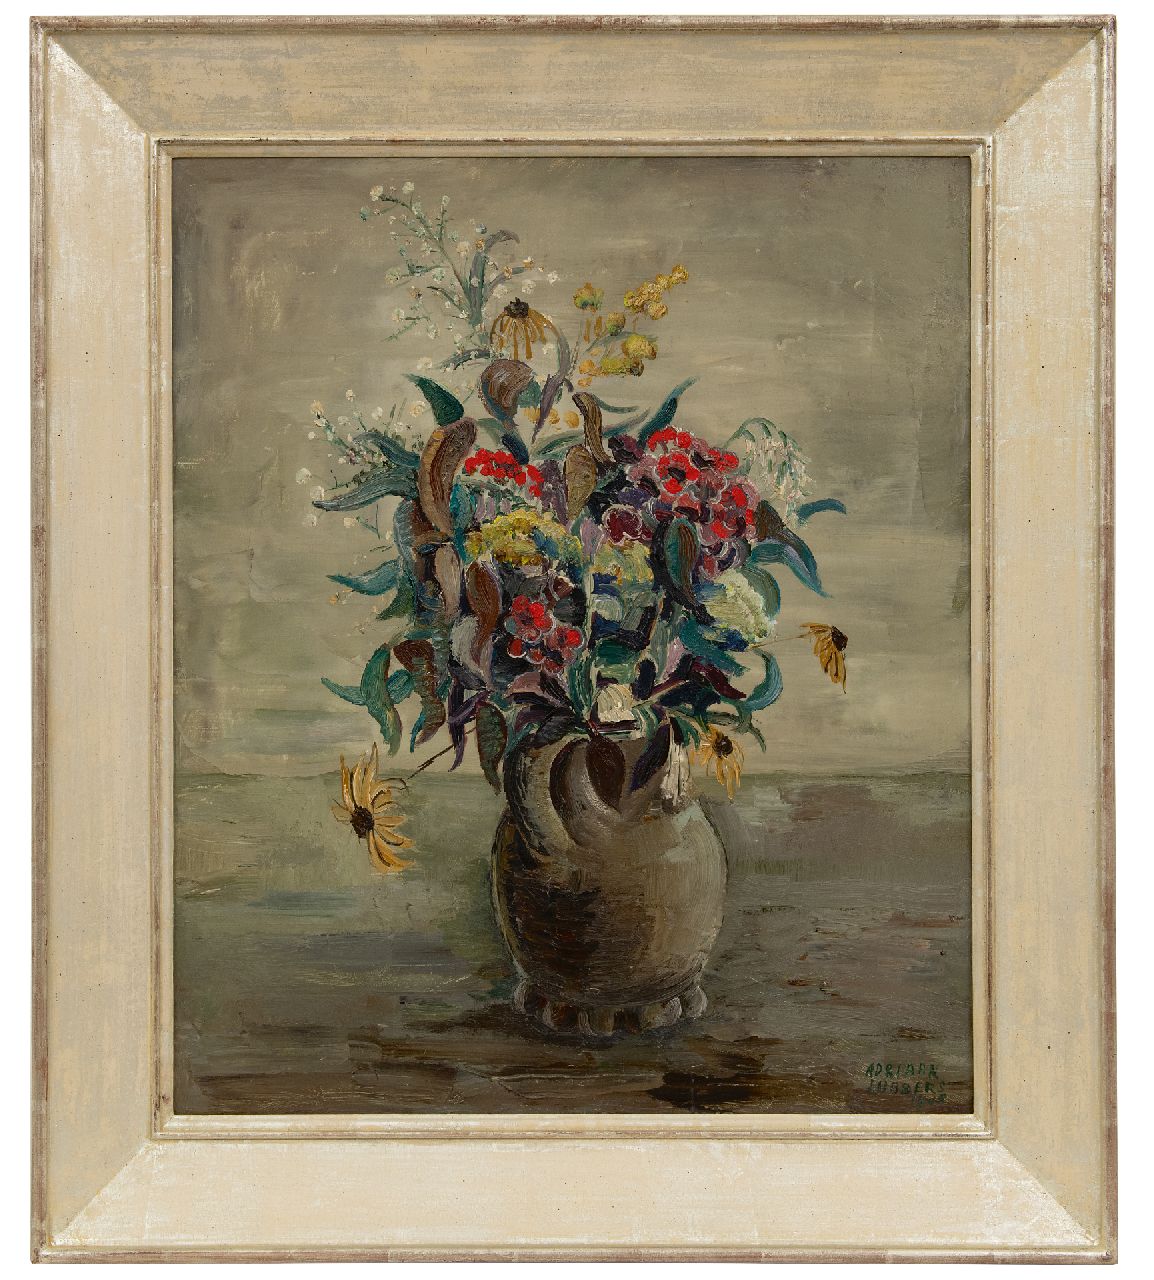 Lubbers A.  | Adriaan Lubbers | Paintings offered for sale | Flower still life in earthenware vase, oil on canvas 60.0 x 50.3 cm, signed l.r. and dated 1946